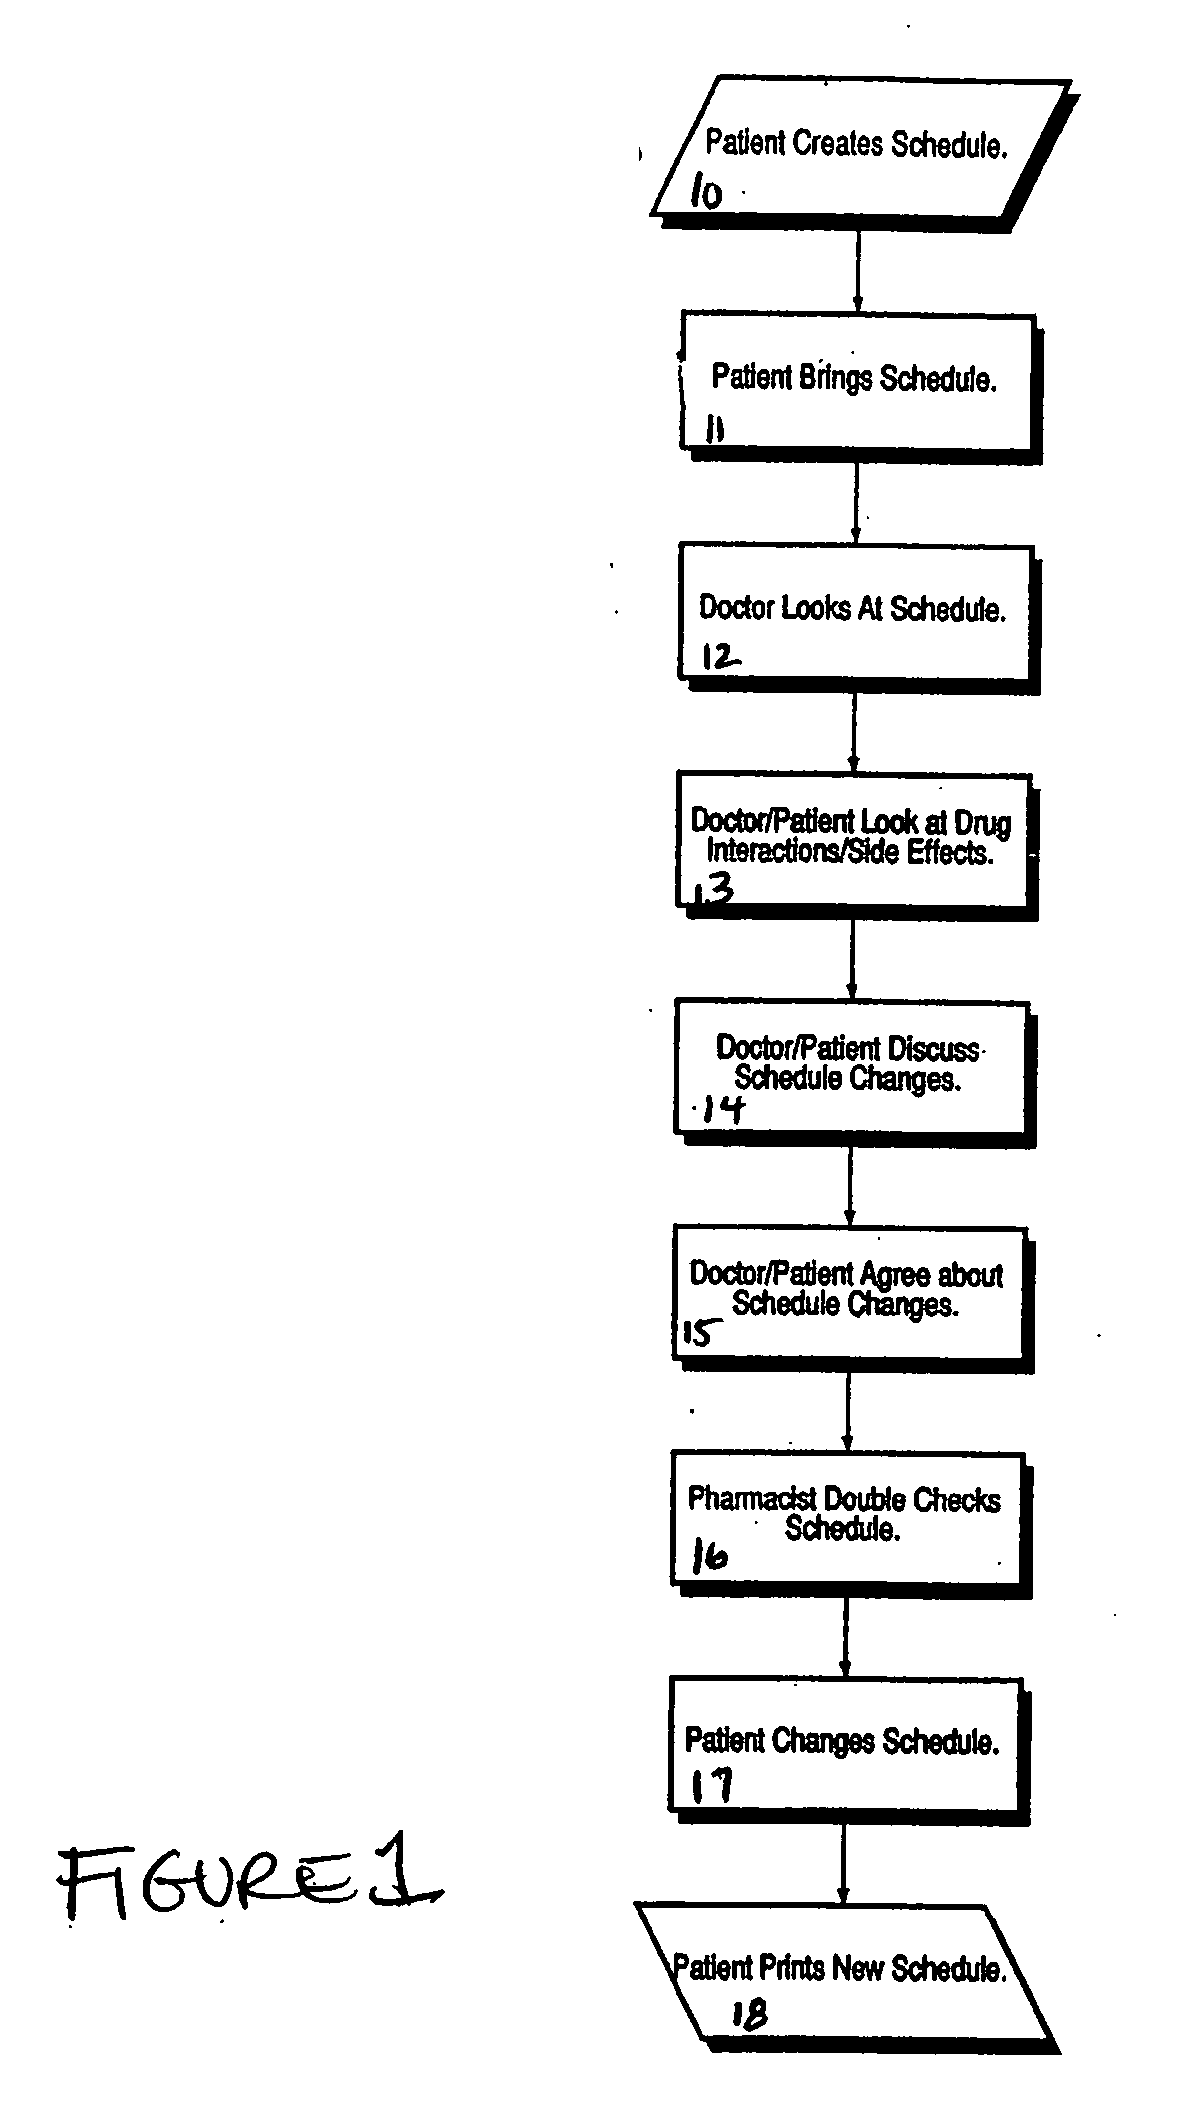 System and method to assist patients in complying with medication regimes